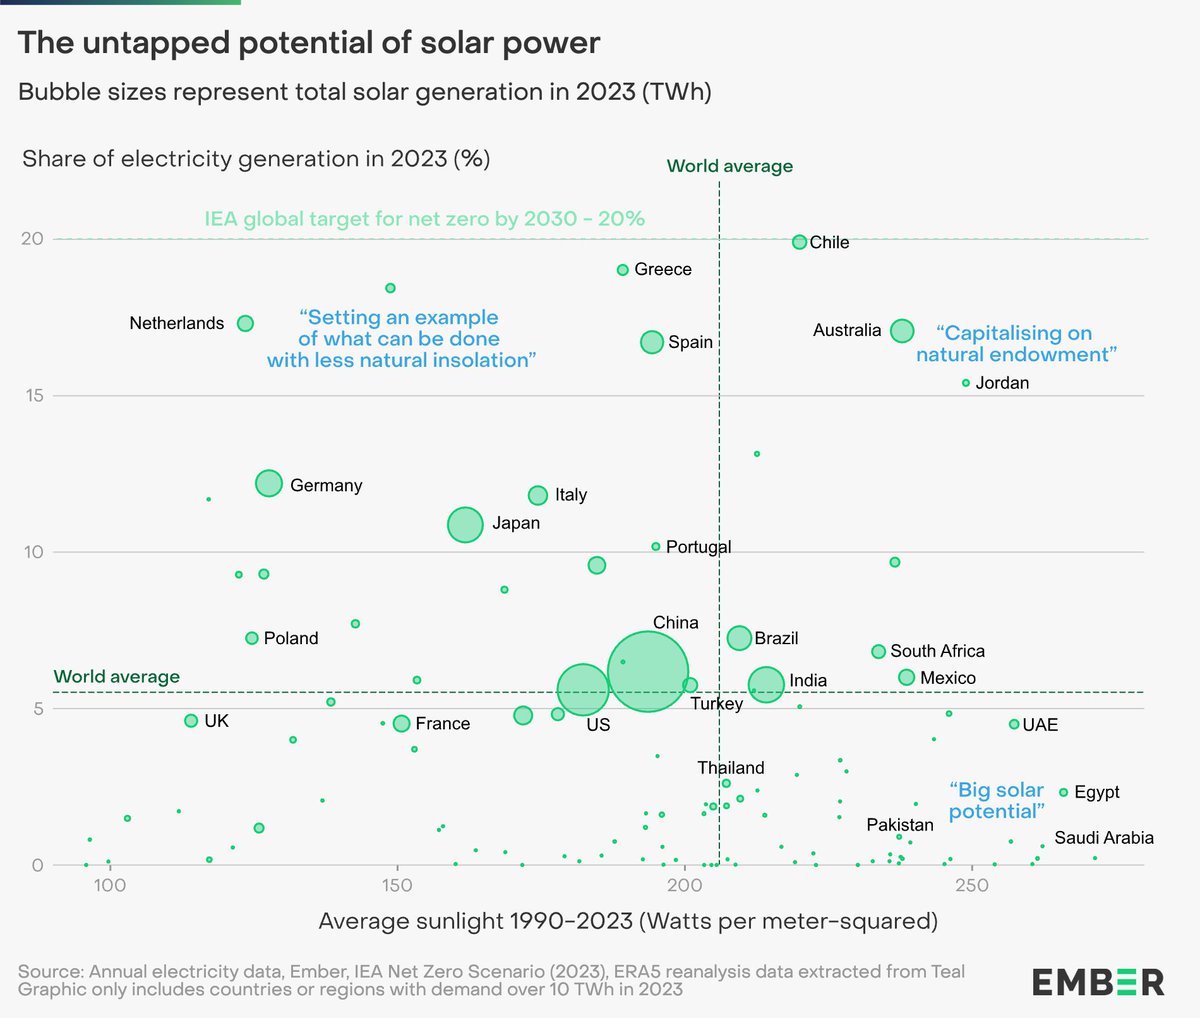 Many sunny countries have yet to unleash the potential of solar power. Chile shows what can be done, with 20% ☀️ electricity in 2023, up from 2% in 2015. And even less sunny countries, like the Netherlands (17%), can benefit from solar. ember-climate.org/insights/resea…